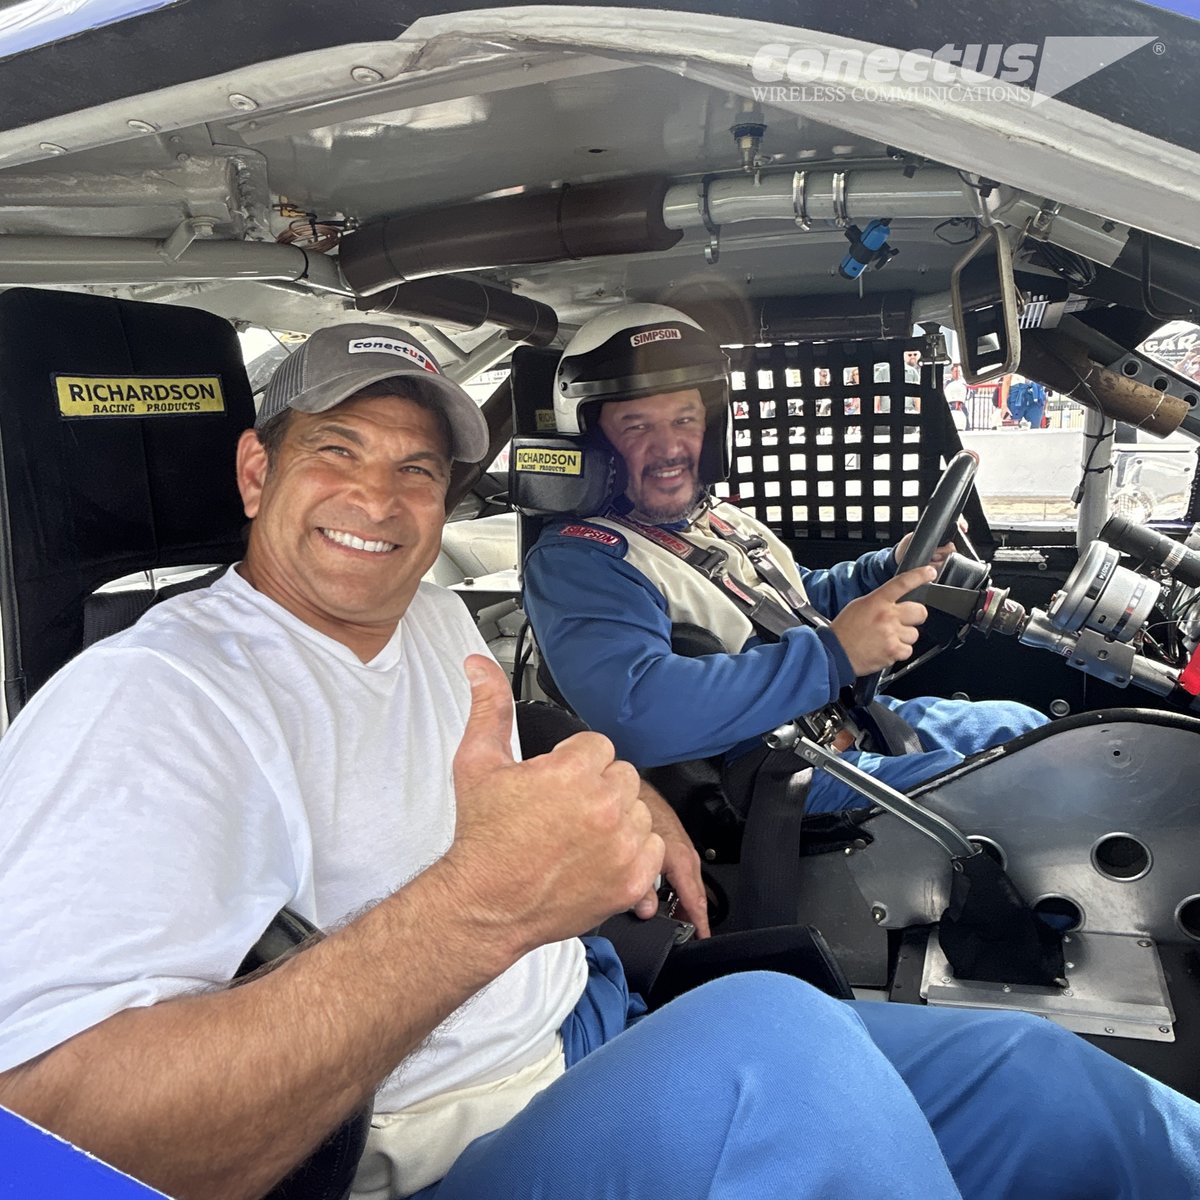 One of the best parts about going to a corporate event at Team Texas Racing School is riding in or driving the ConectUS Stockcar with NASCAR driver David Starr. David is an owner and instructor at the racing school, and the ConectUS Car is always front and center.